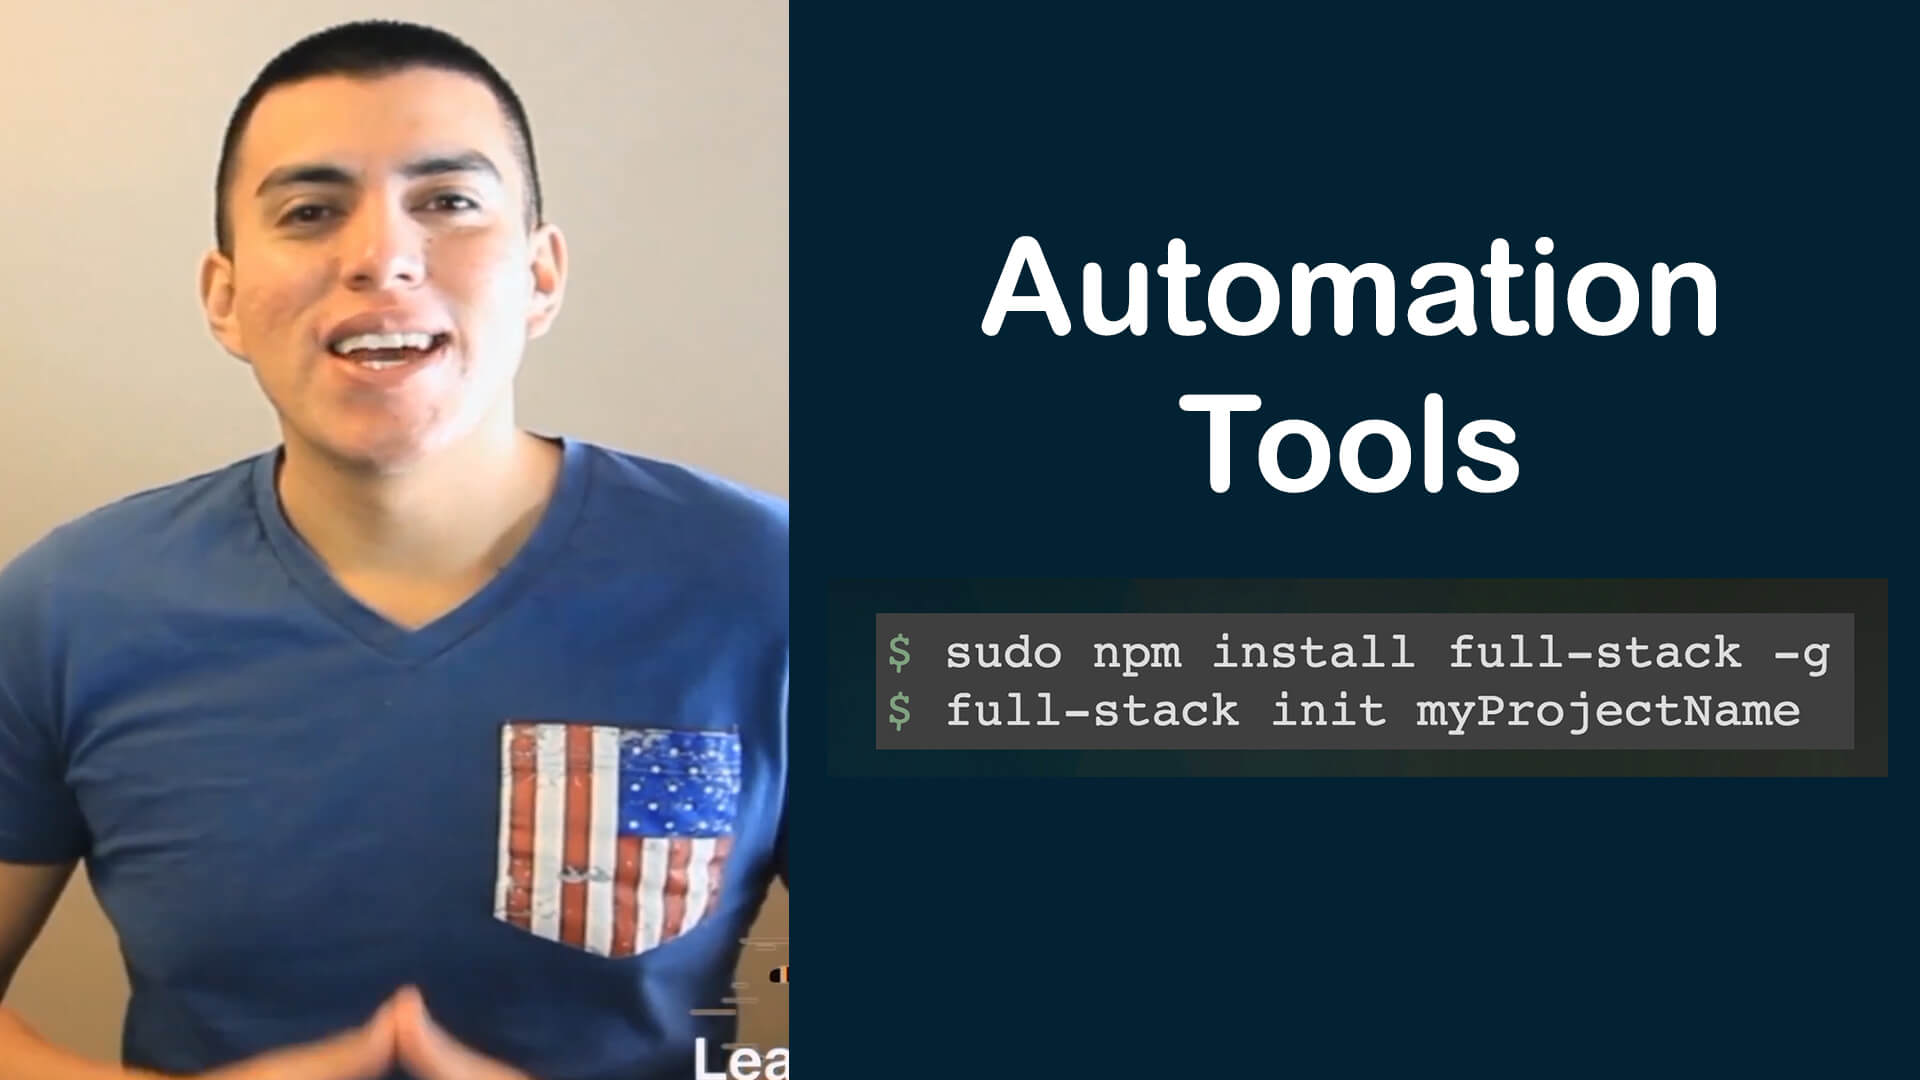 Automation Tool - How To Transform Into a Full Stack Developer